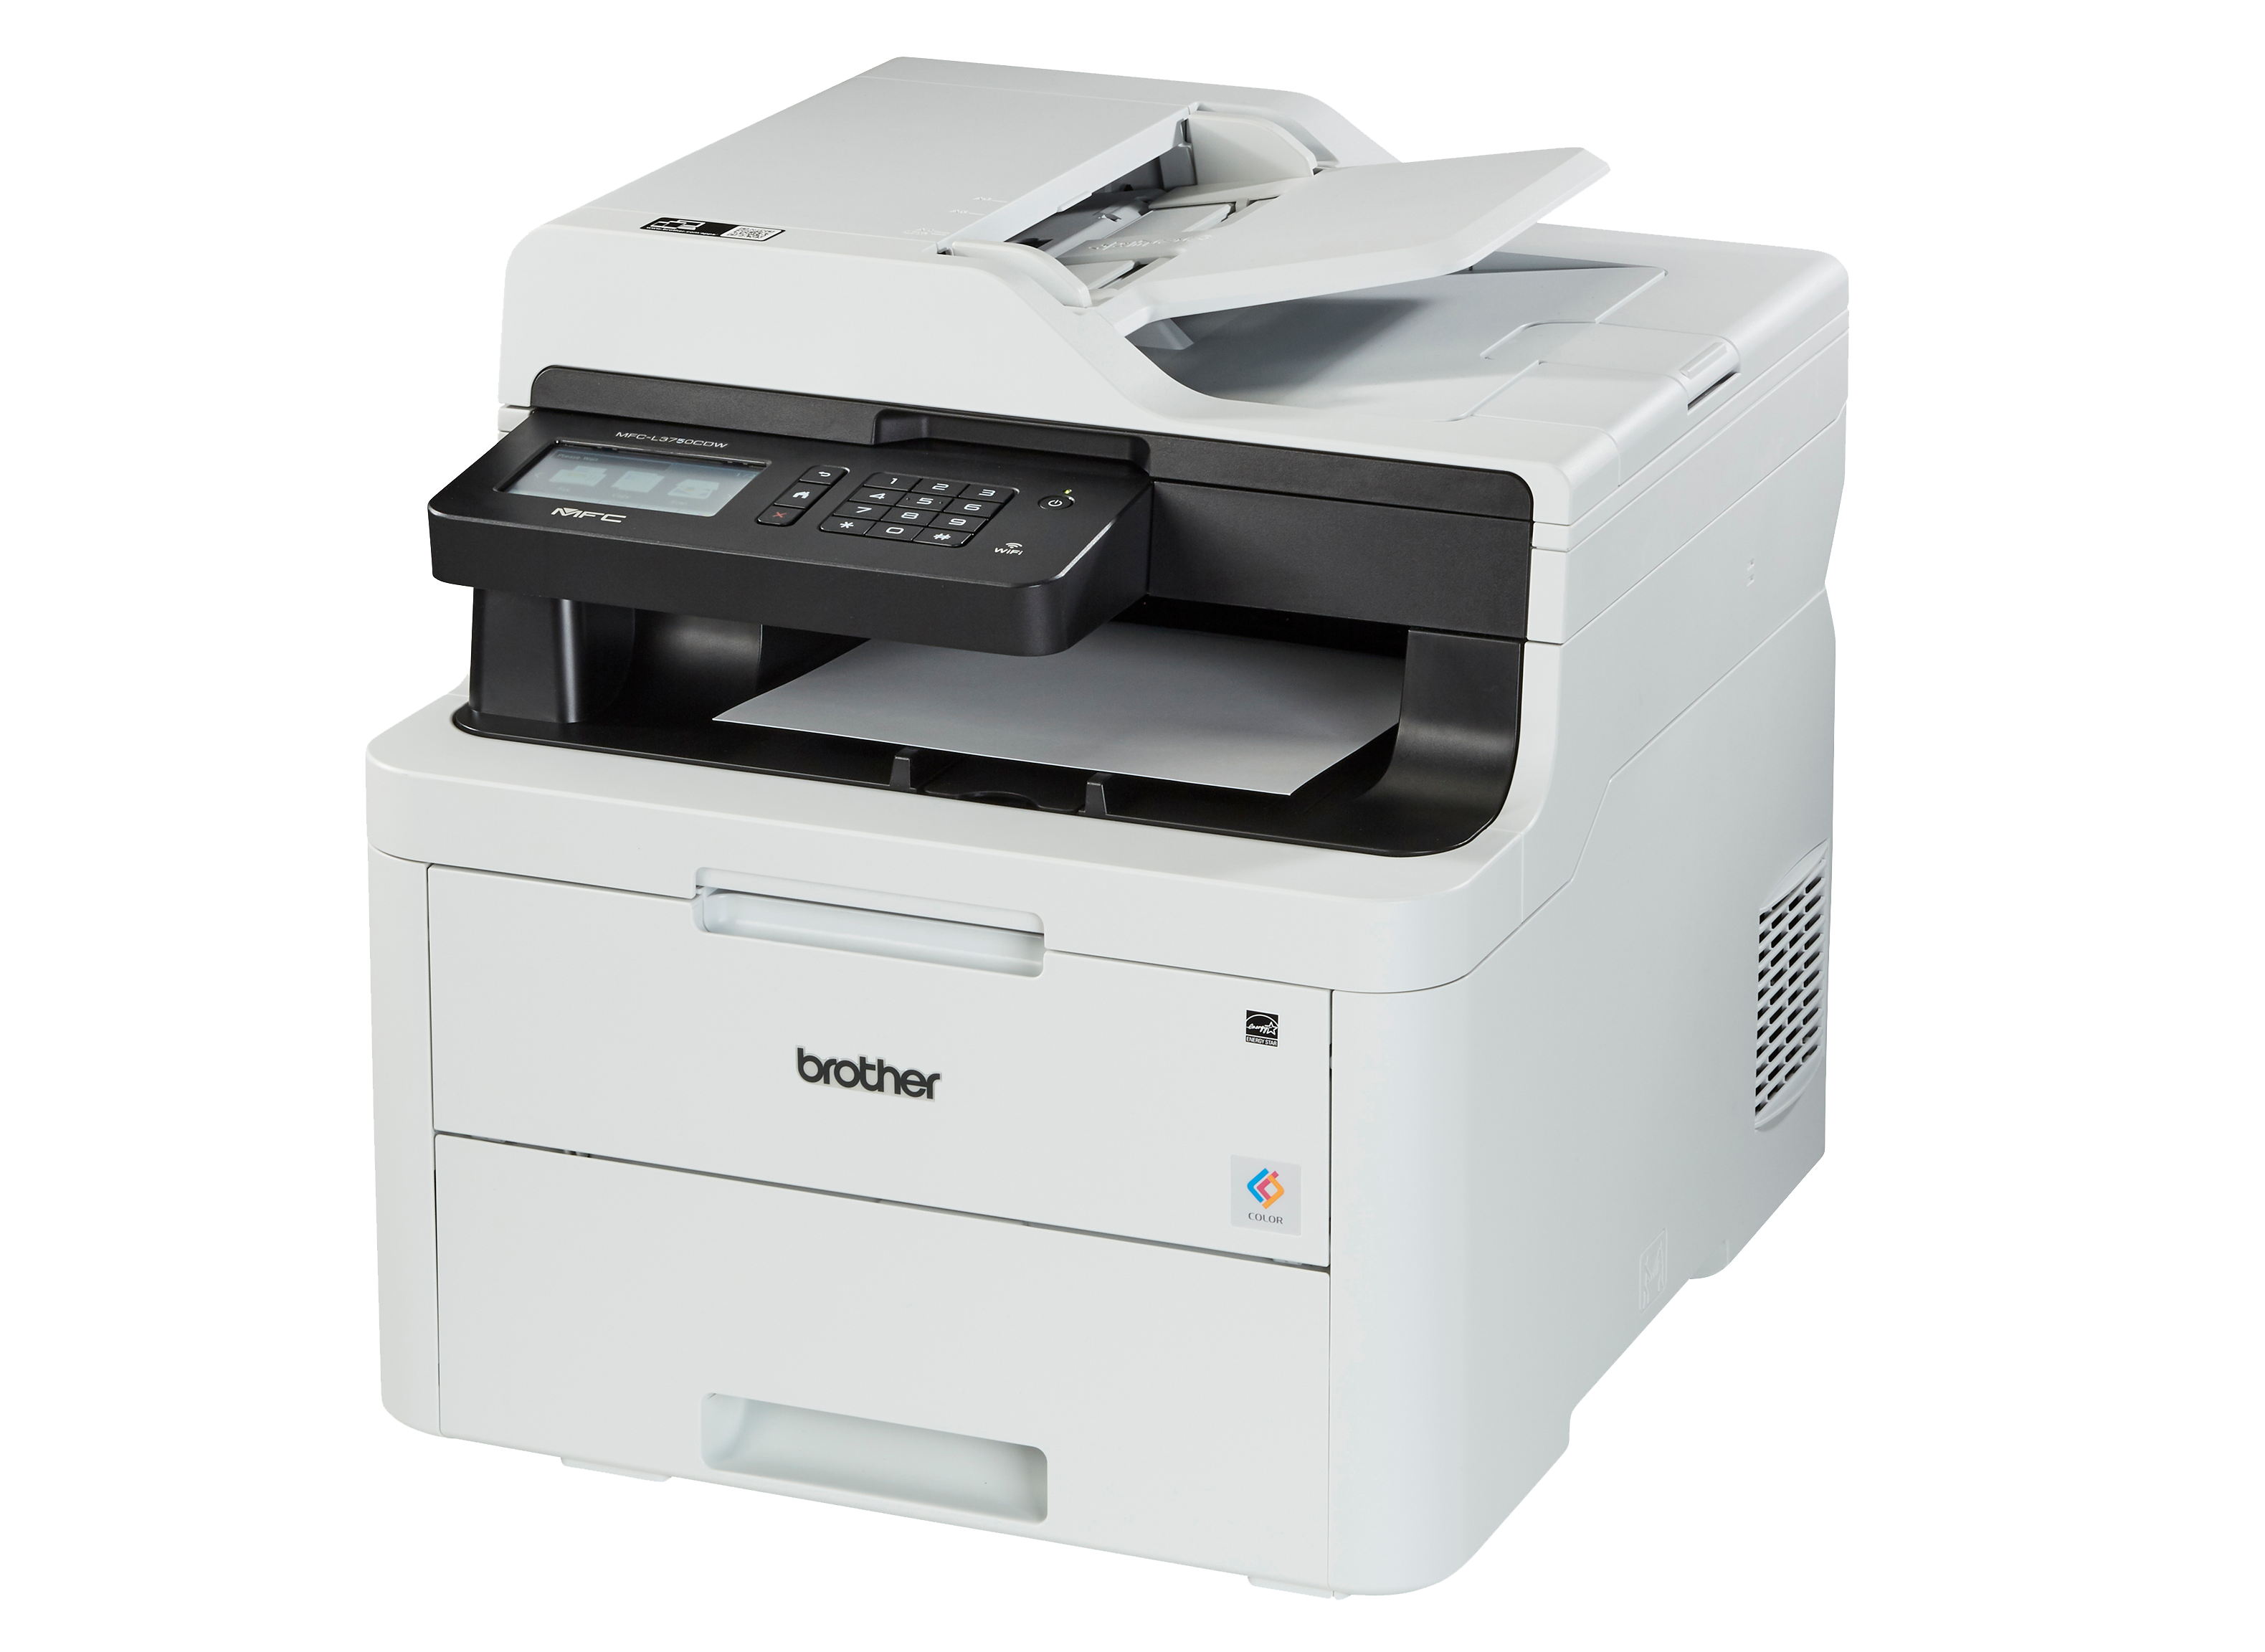 Brother MFC-L3750CDW Color LED All-in-One Printer MFC-L3750CDW